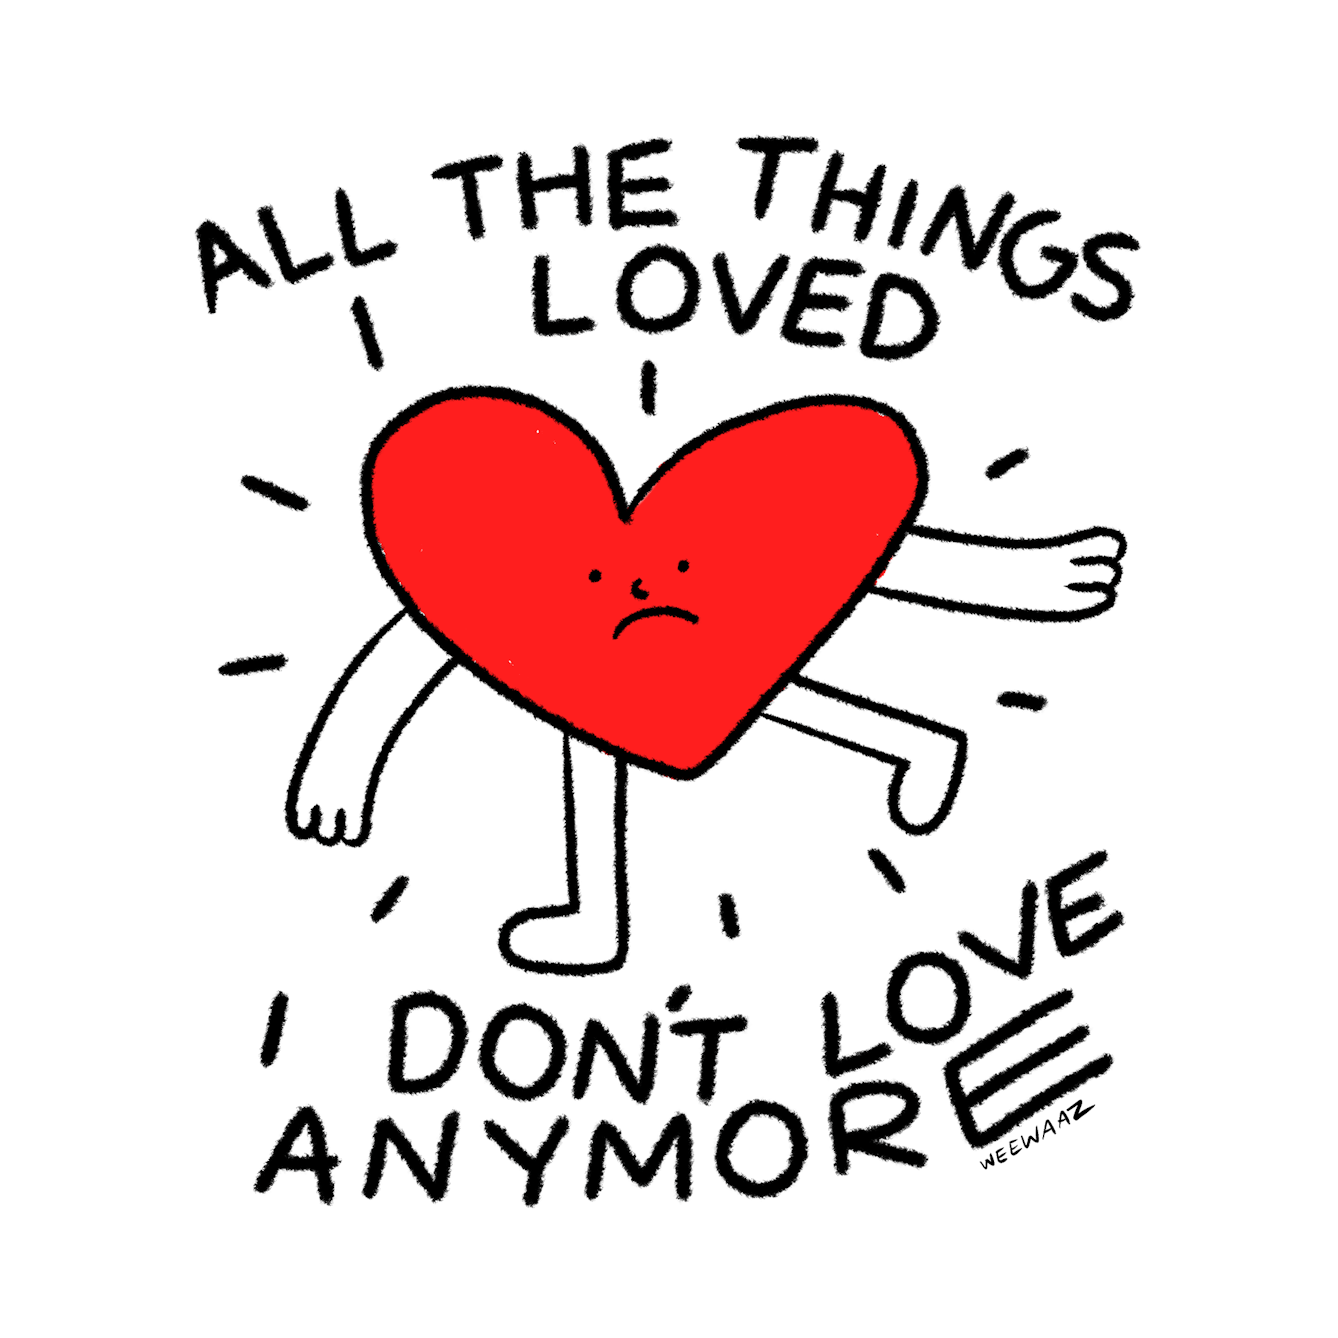 A heart character with arms and legs has a worried expression and is surrounded by text that reads ‘All the things I loved I don’t love anymore’.